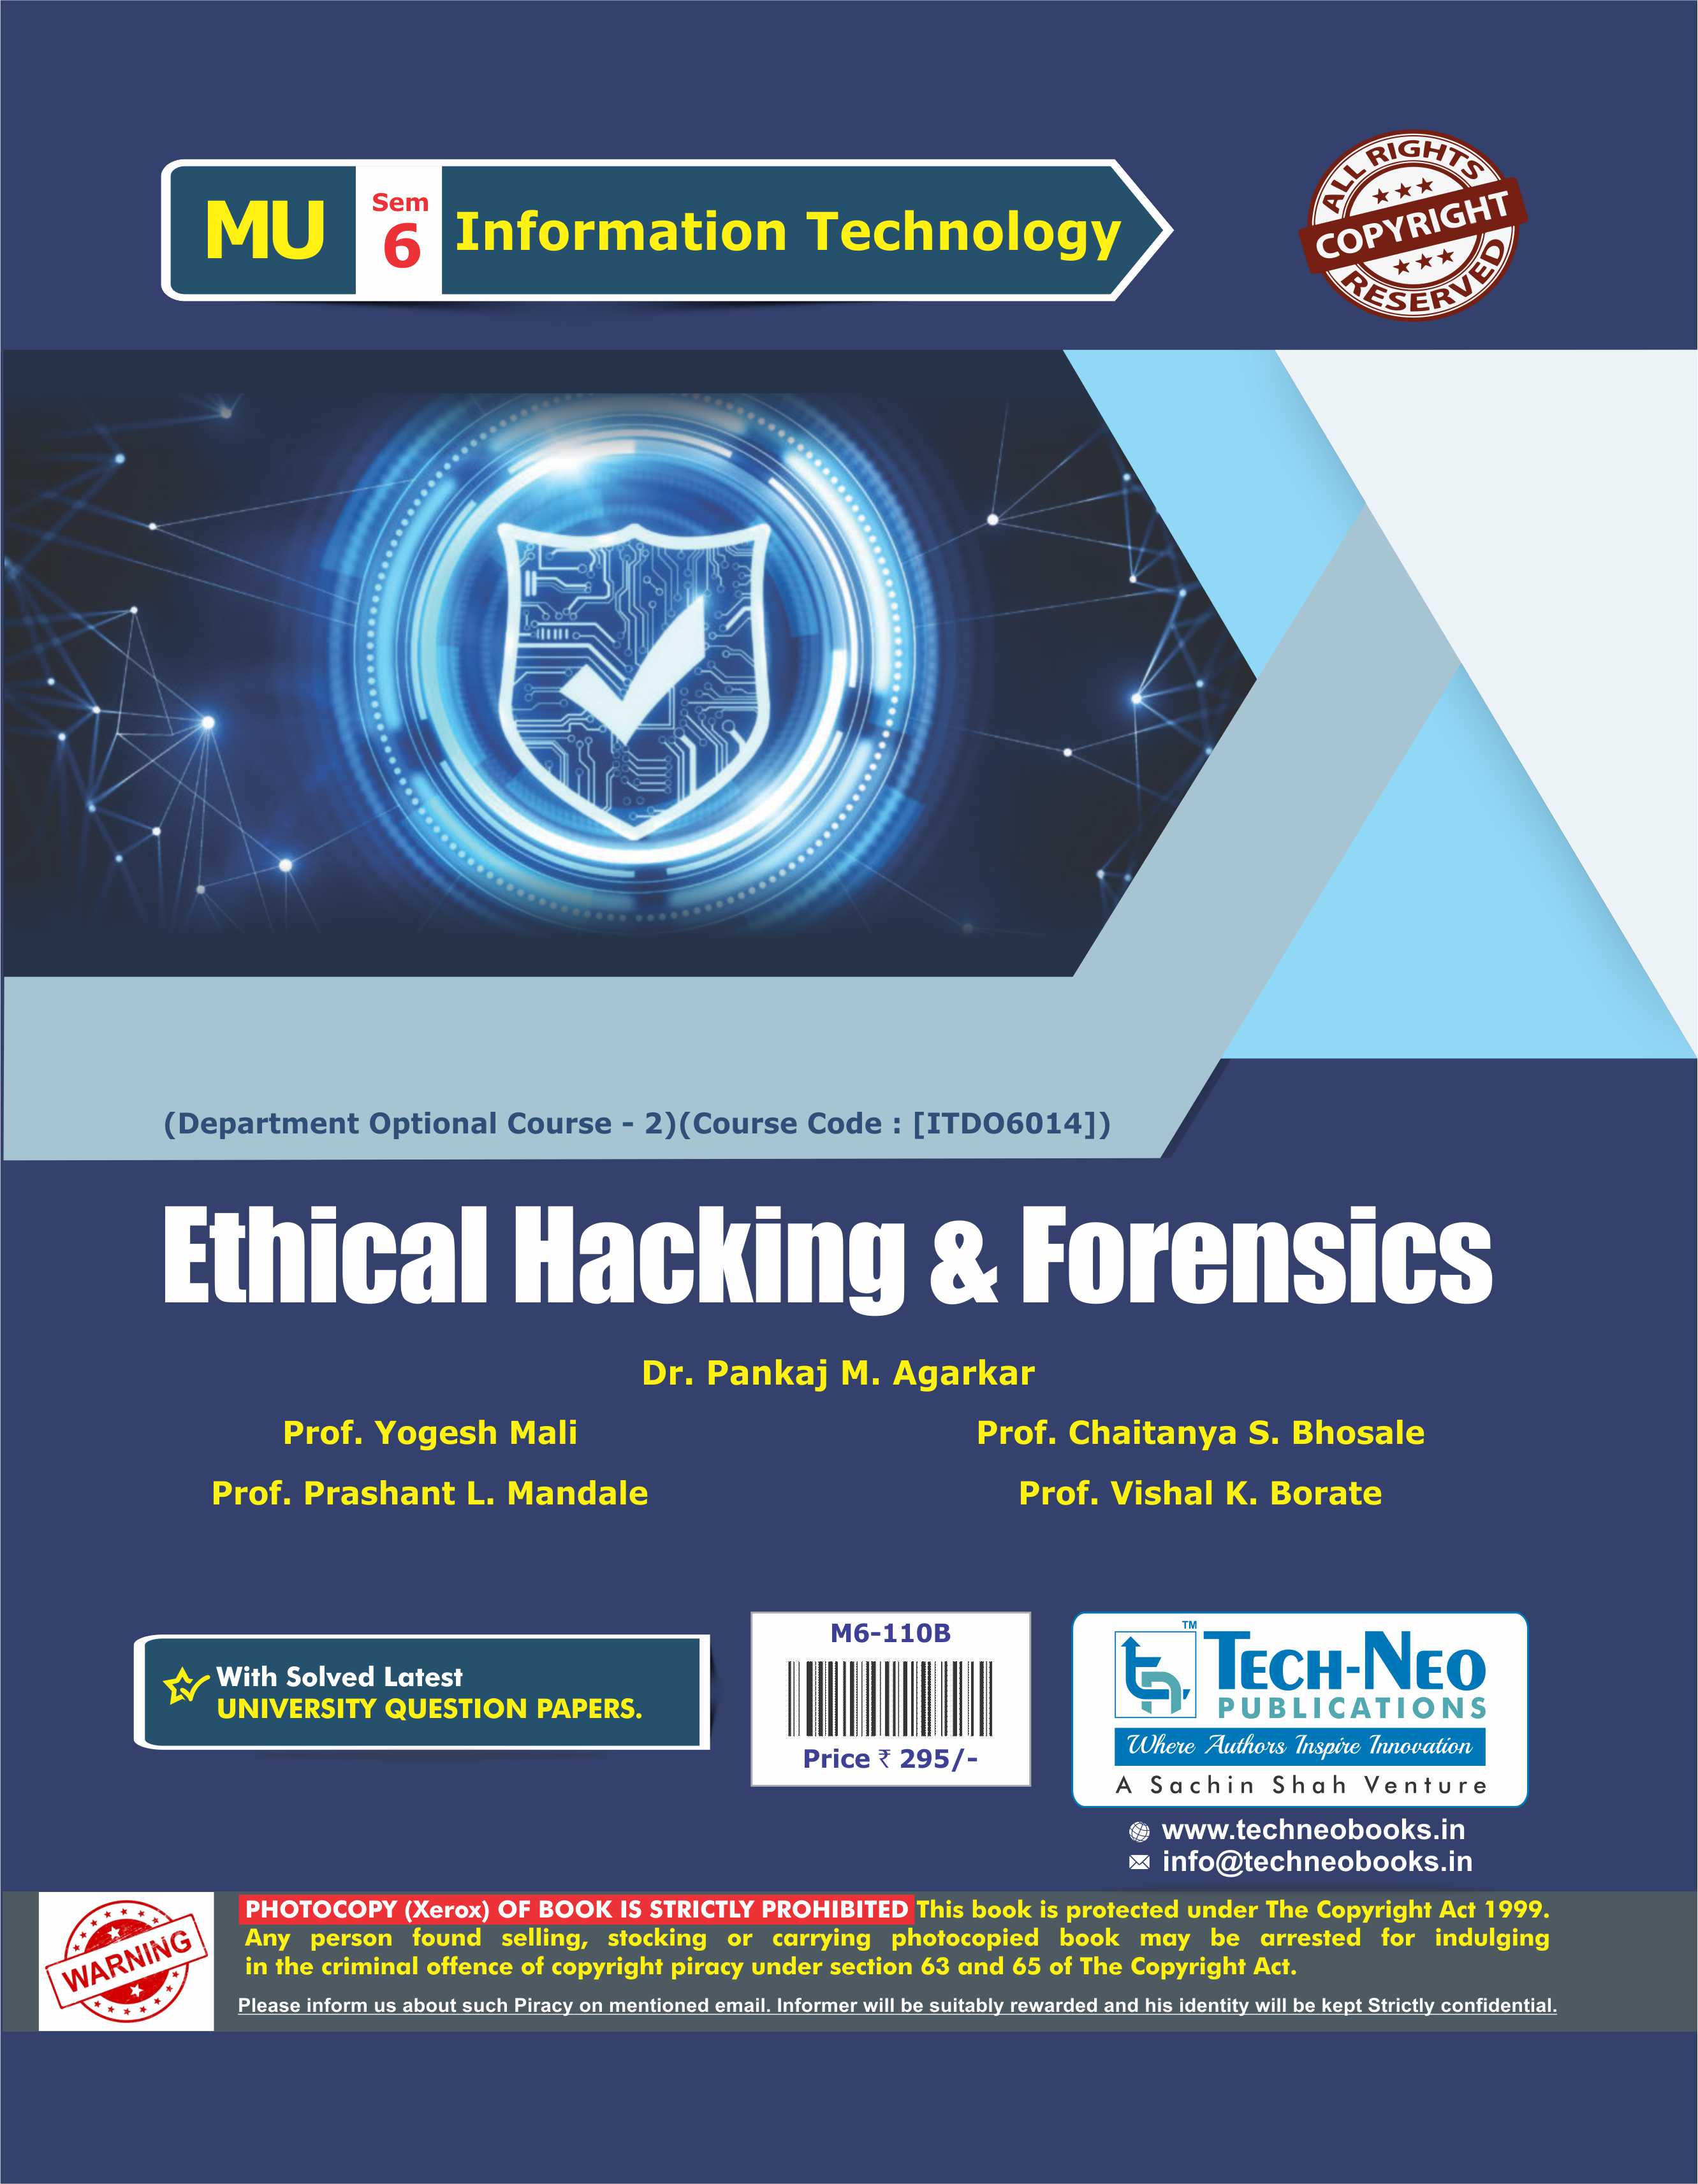 Ethical Hacking & Forensics